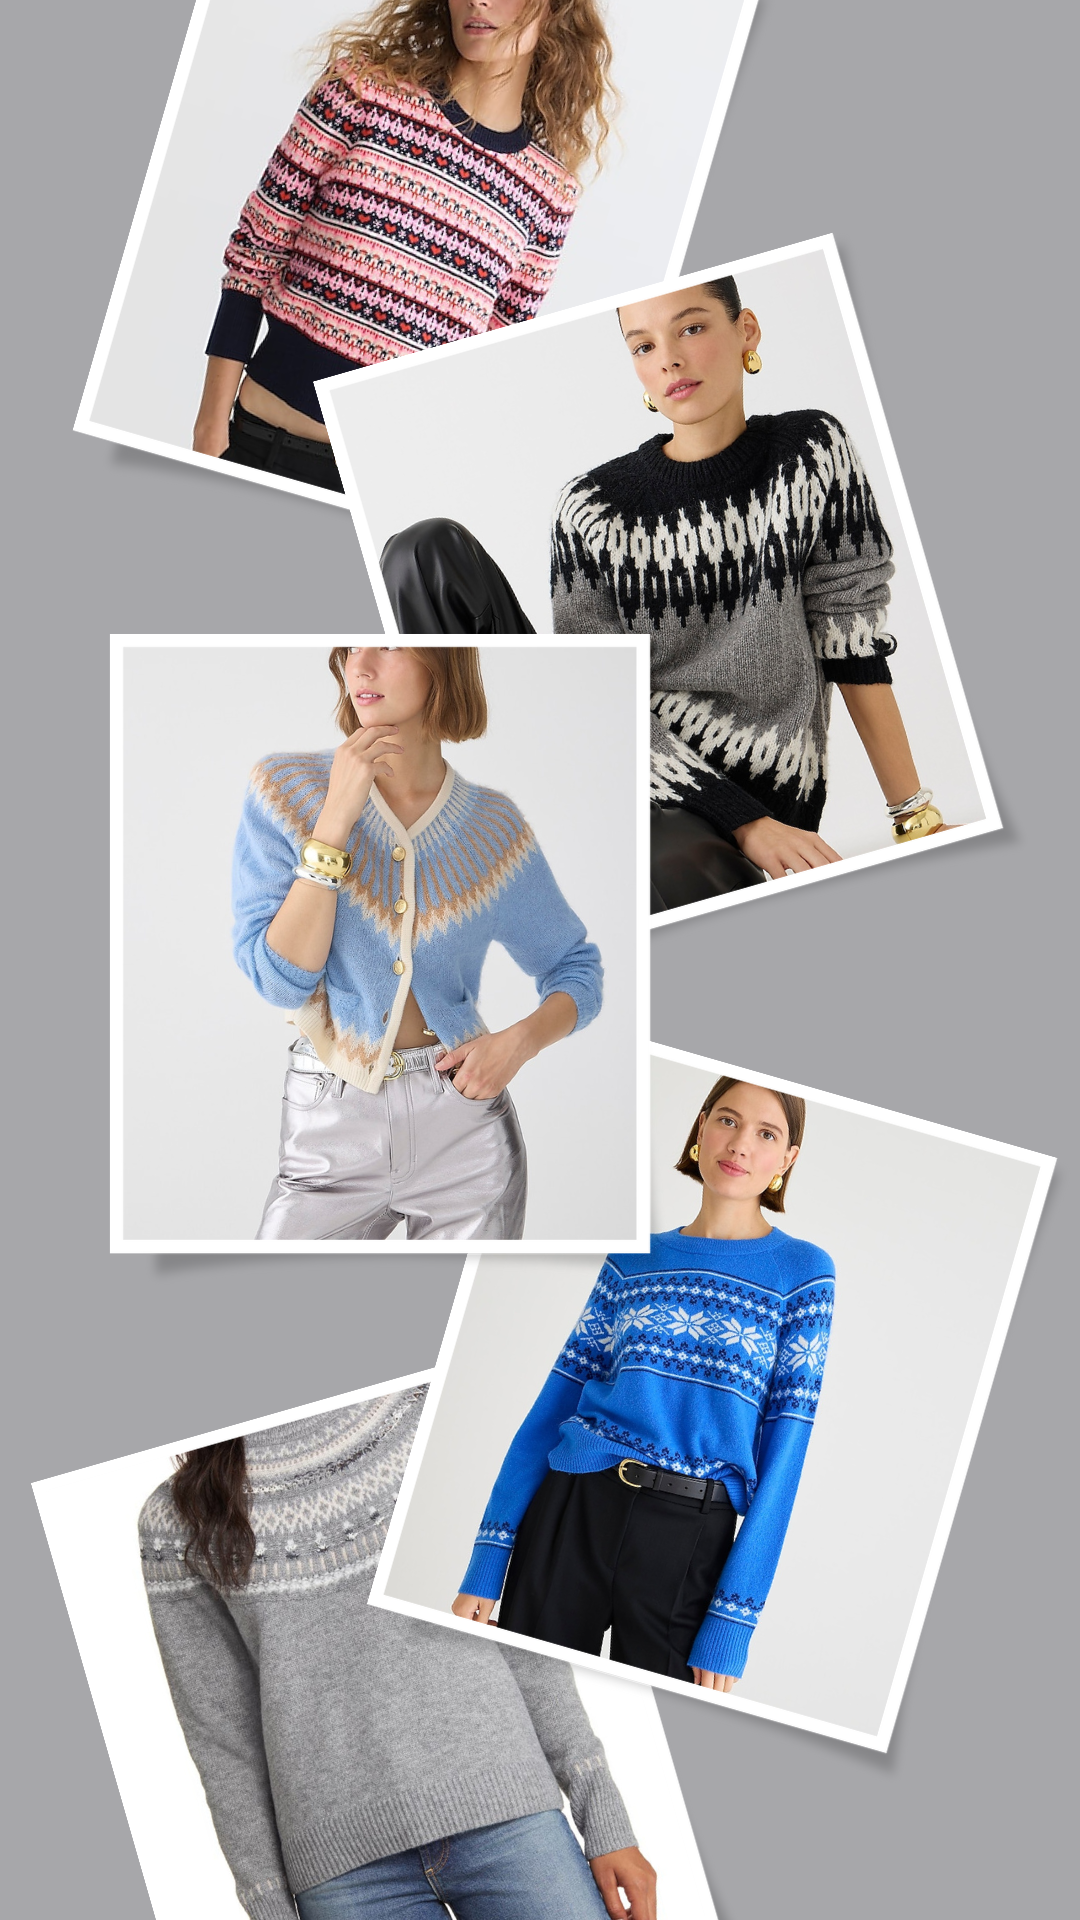 Rock the 11 Fair Isle Sweaters with Confidence This Season